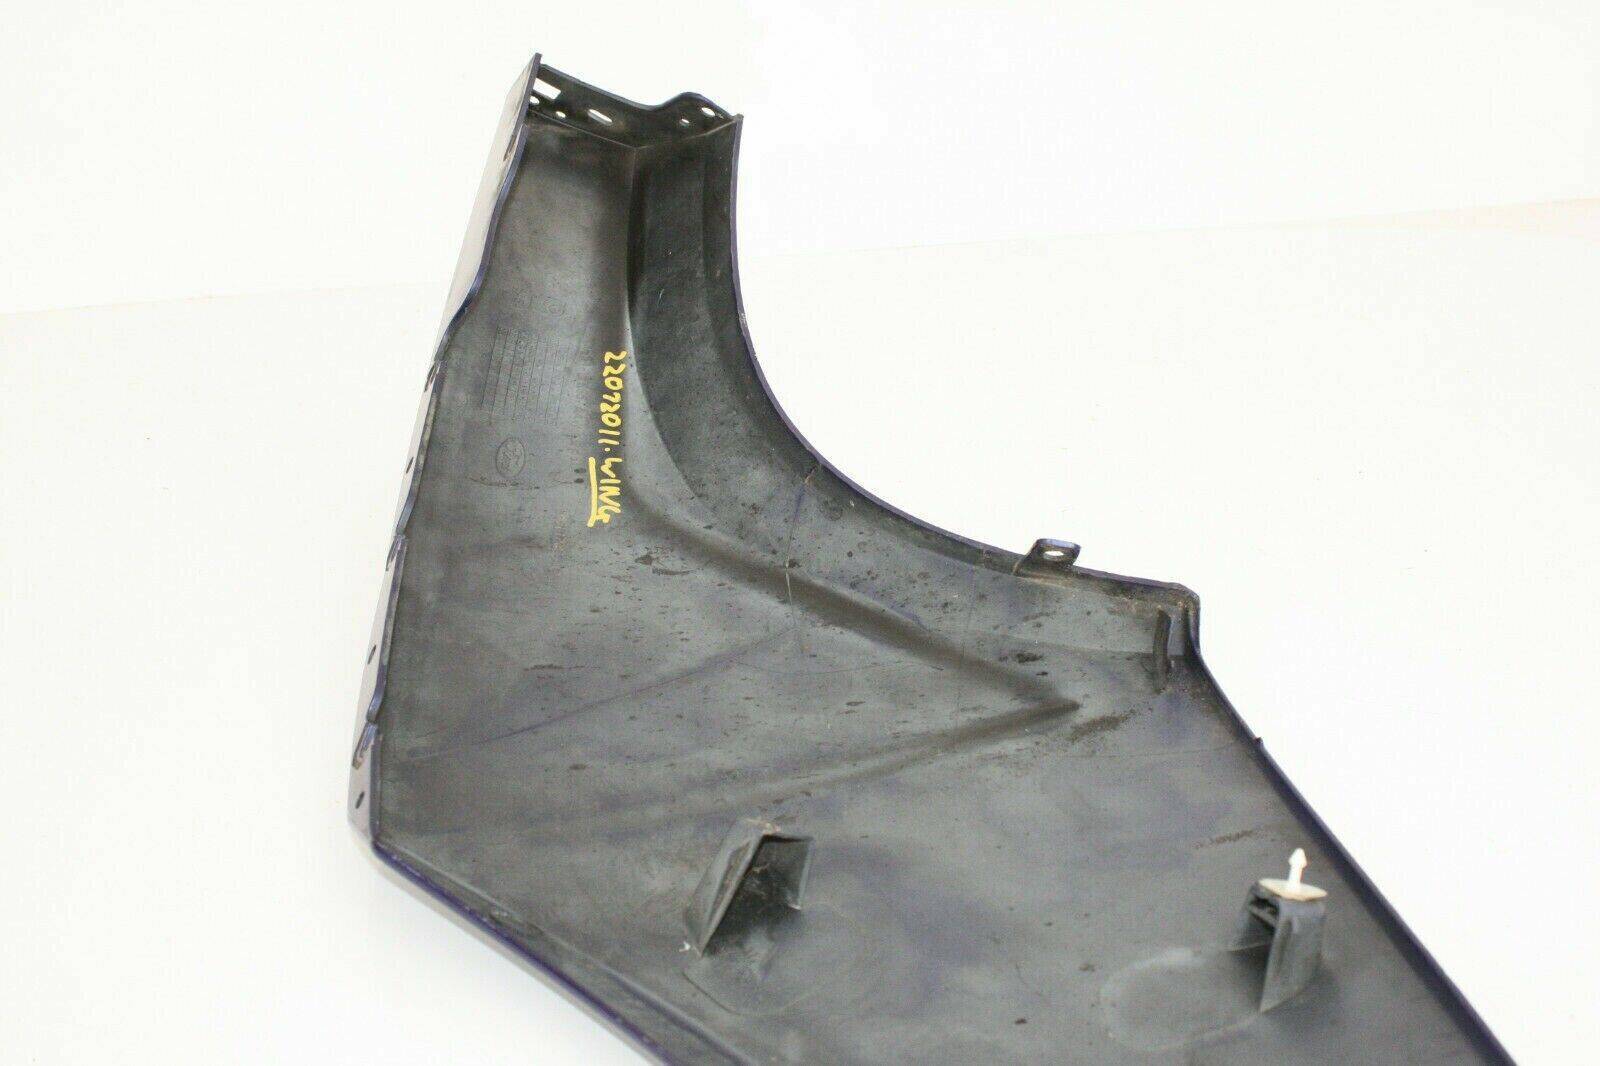 FORD-KA-SPORTKA-REAR-BUMPER-RIGHT-LOWER-SECTION-2003-TO-2008-175430905120-8